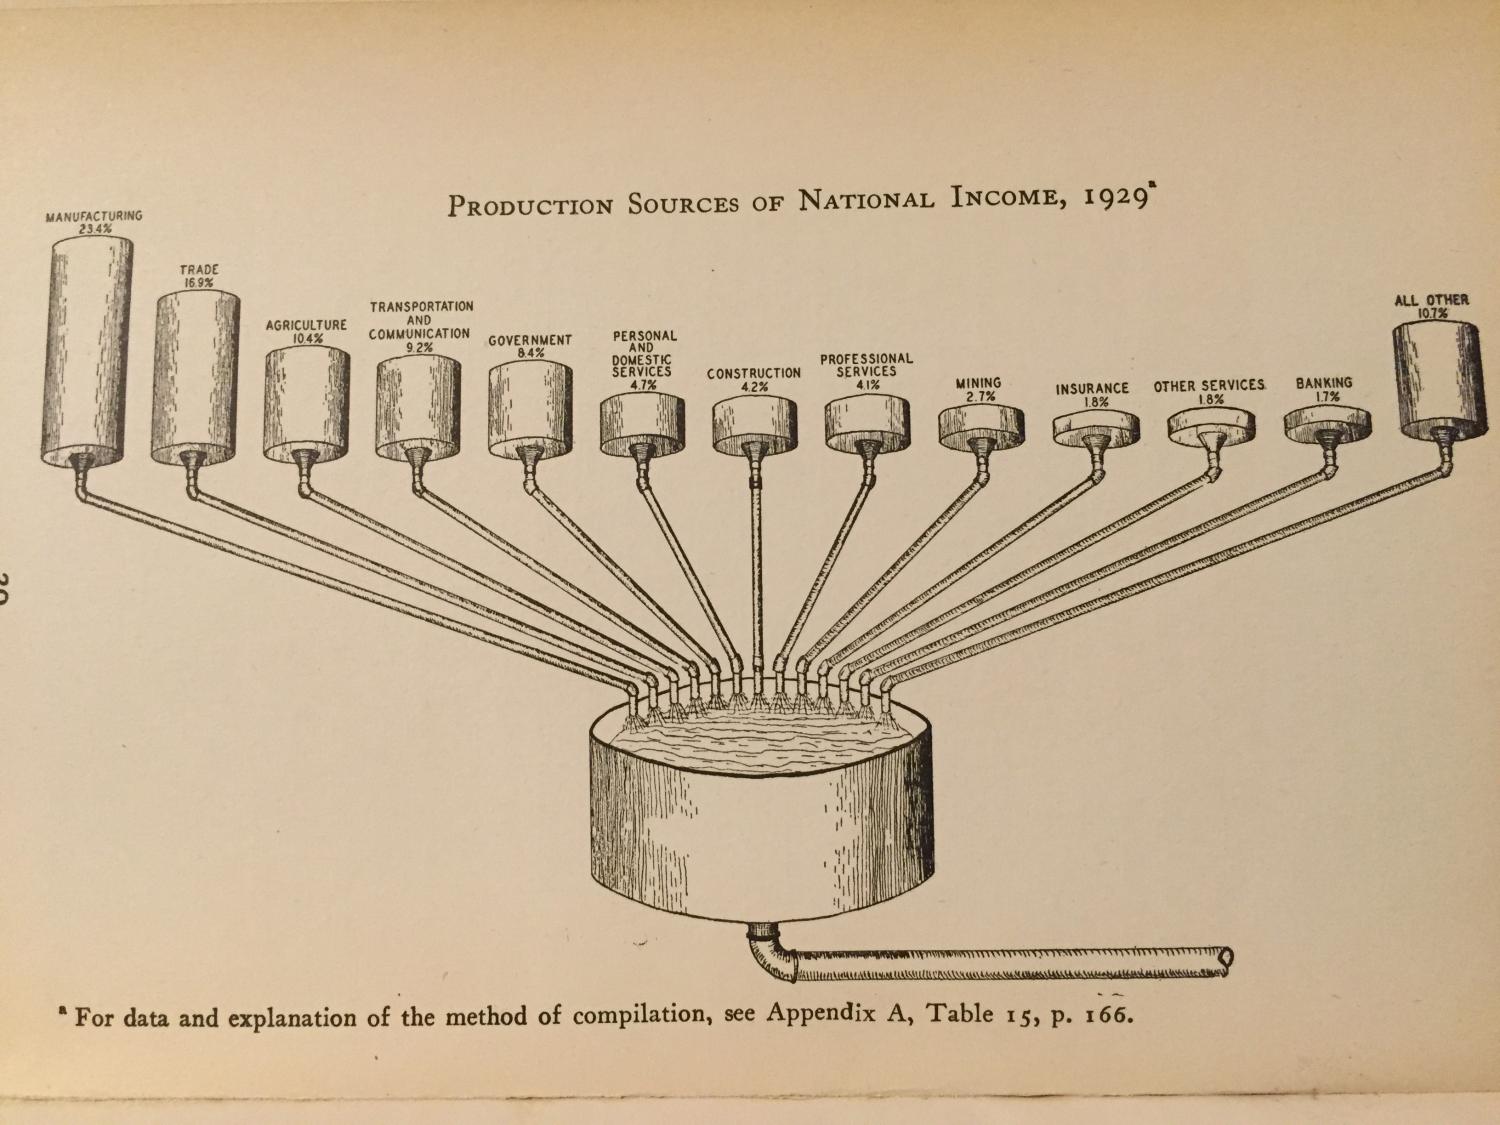 Illustration of the production sources of national income, 1929